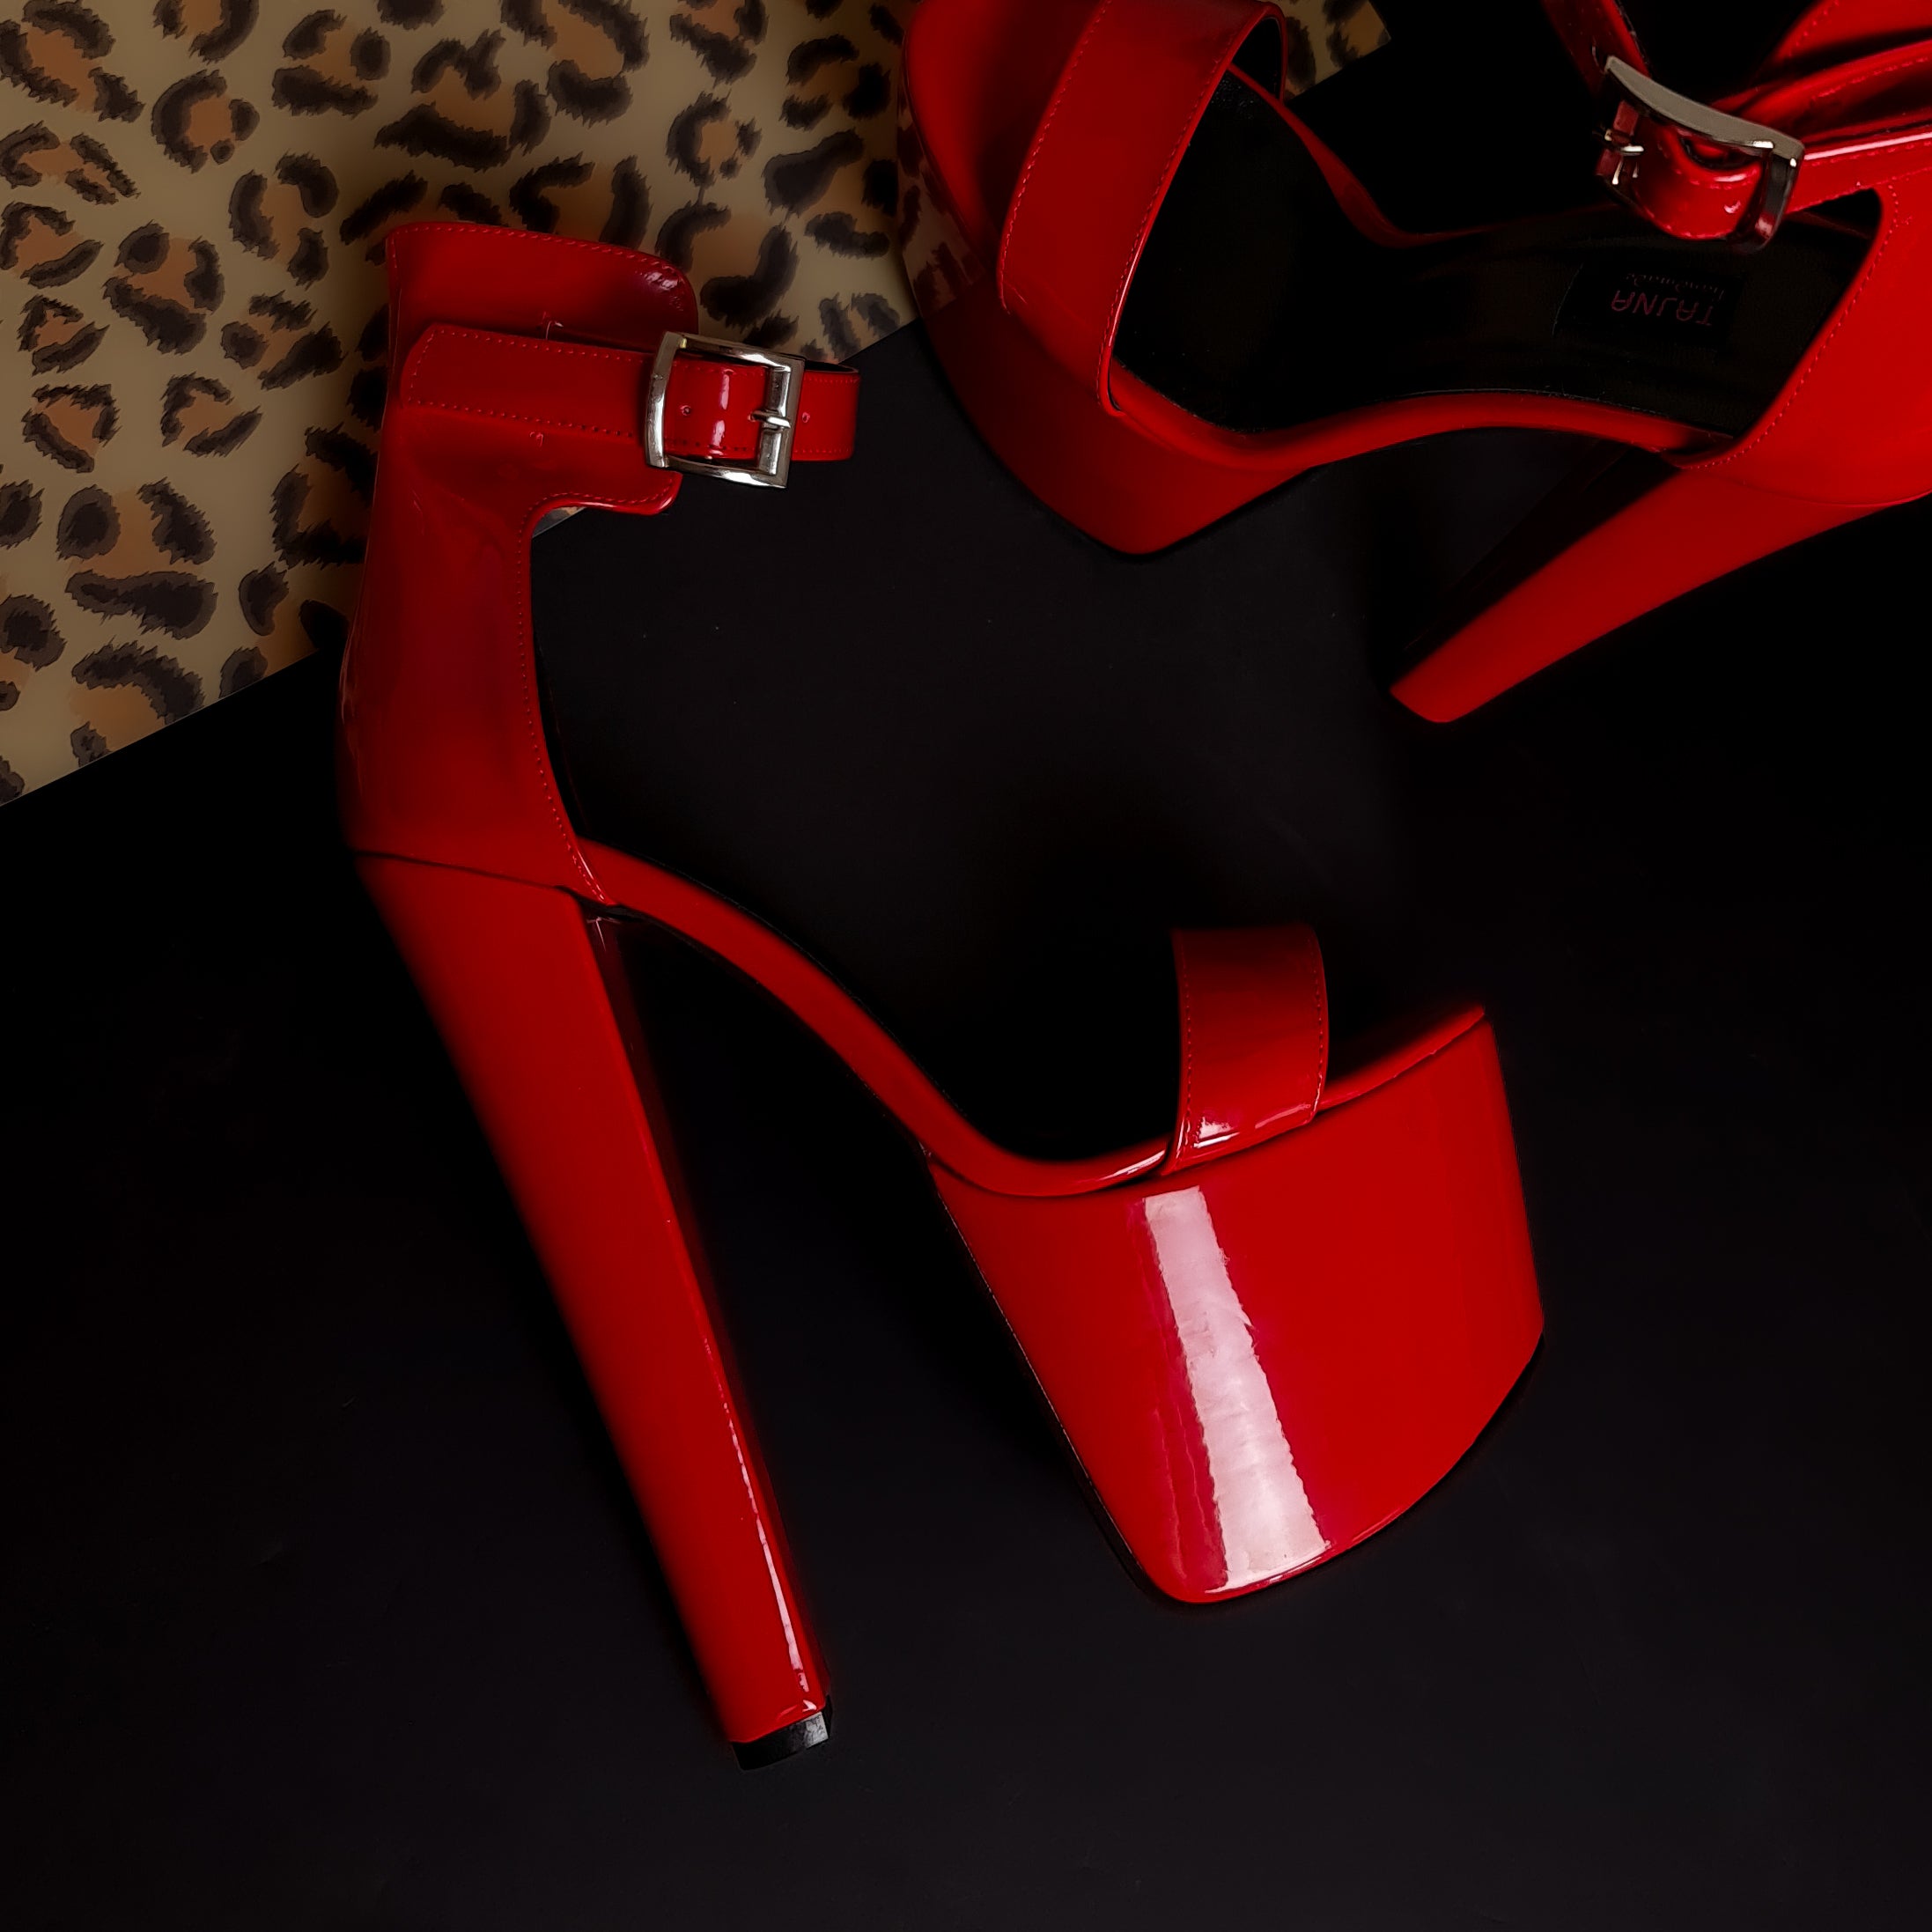 Belted Ankle Red Gloss Chunky High Heel Sandals